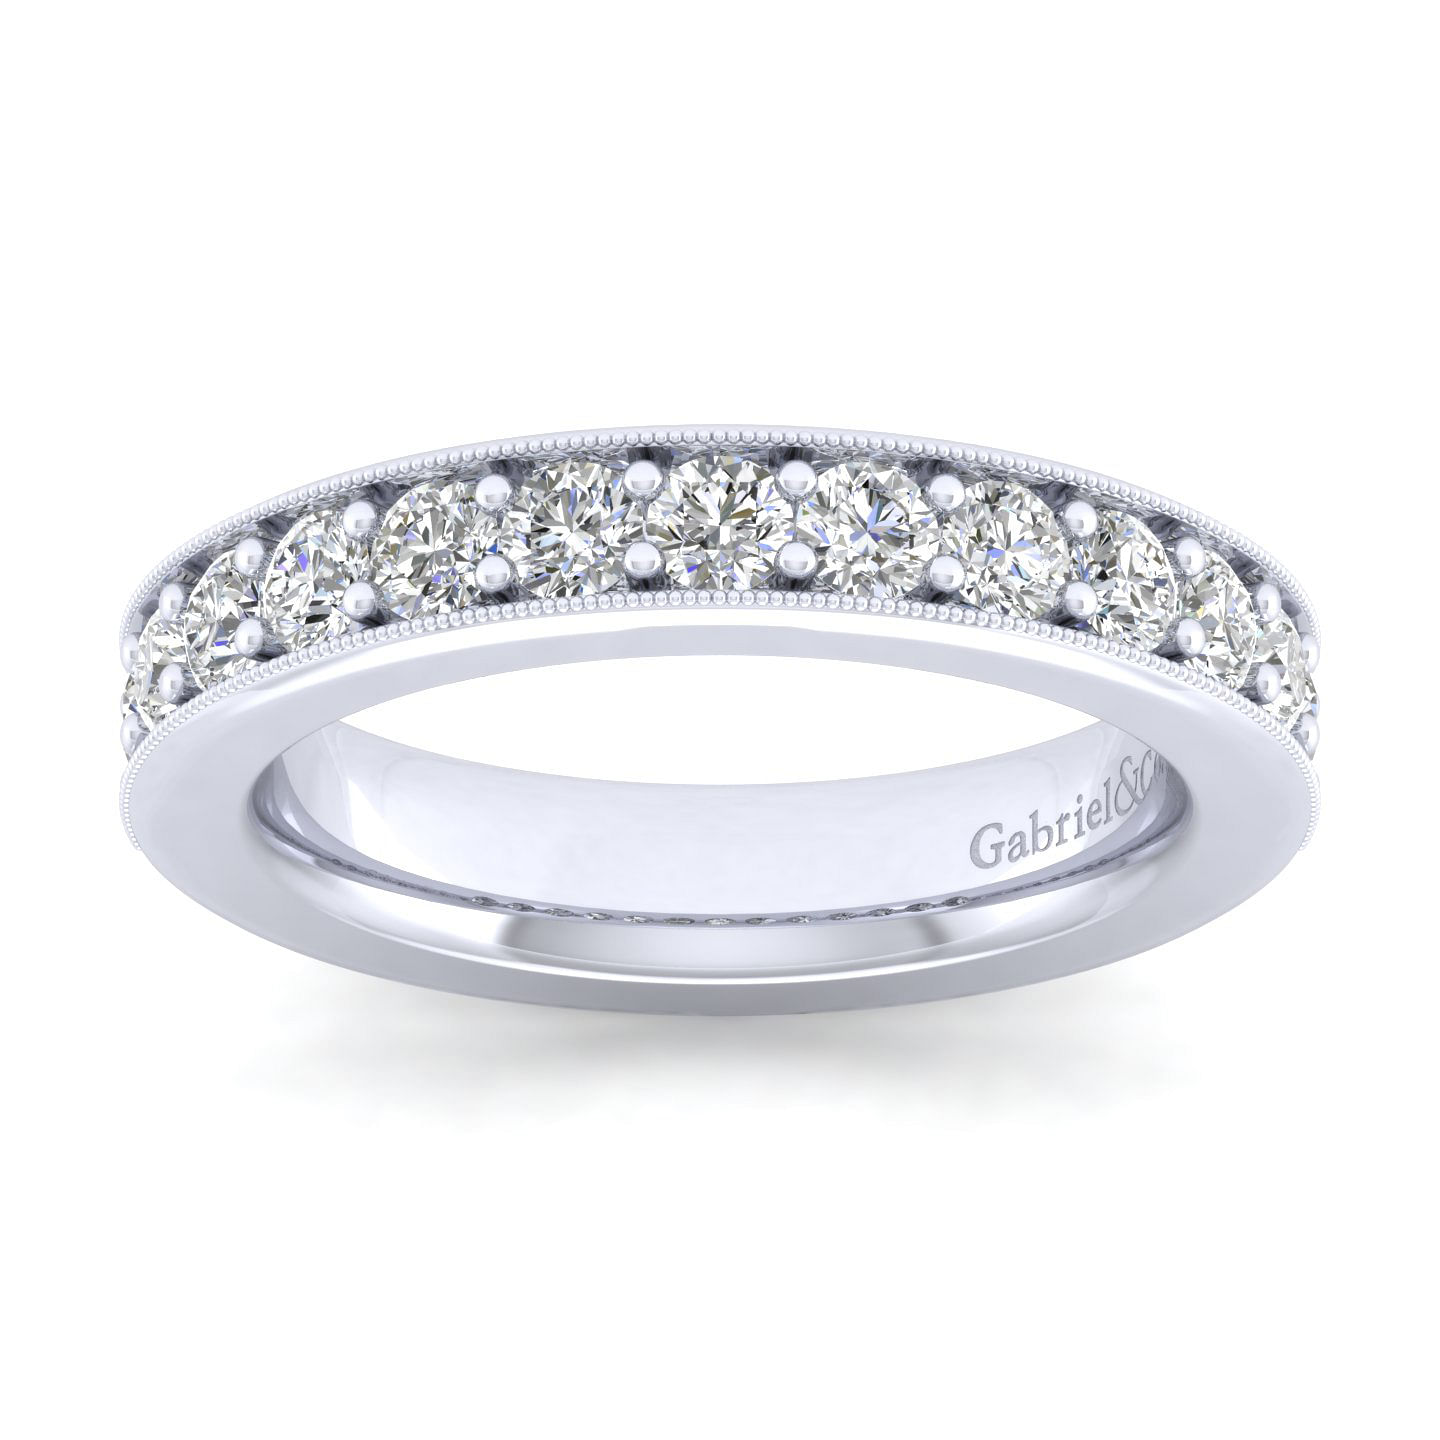 14K White Gold Channel Prong Diamond Anniversary Band with Millgrain